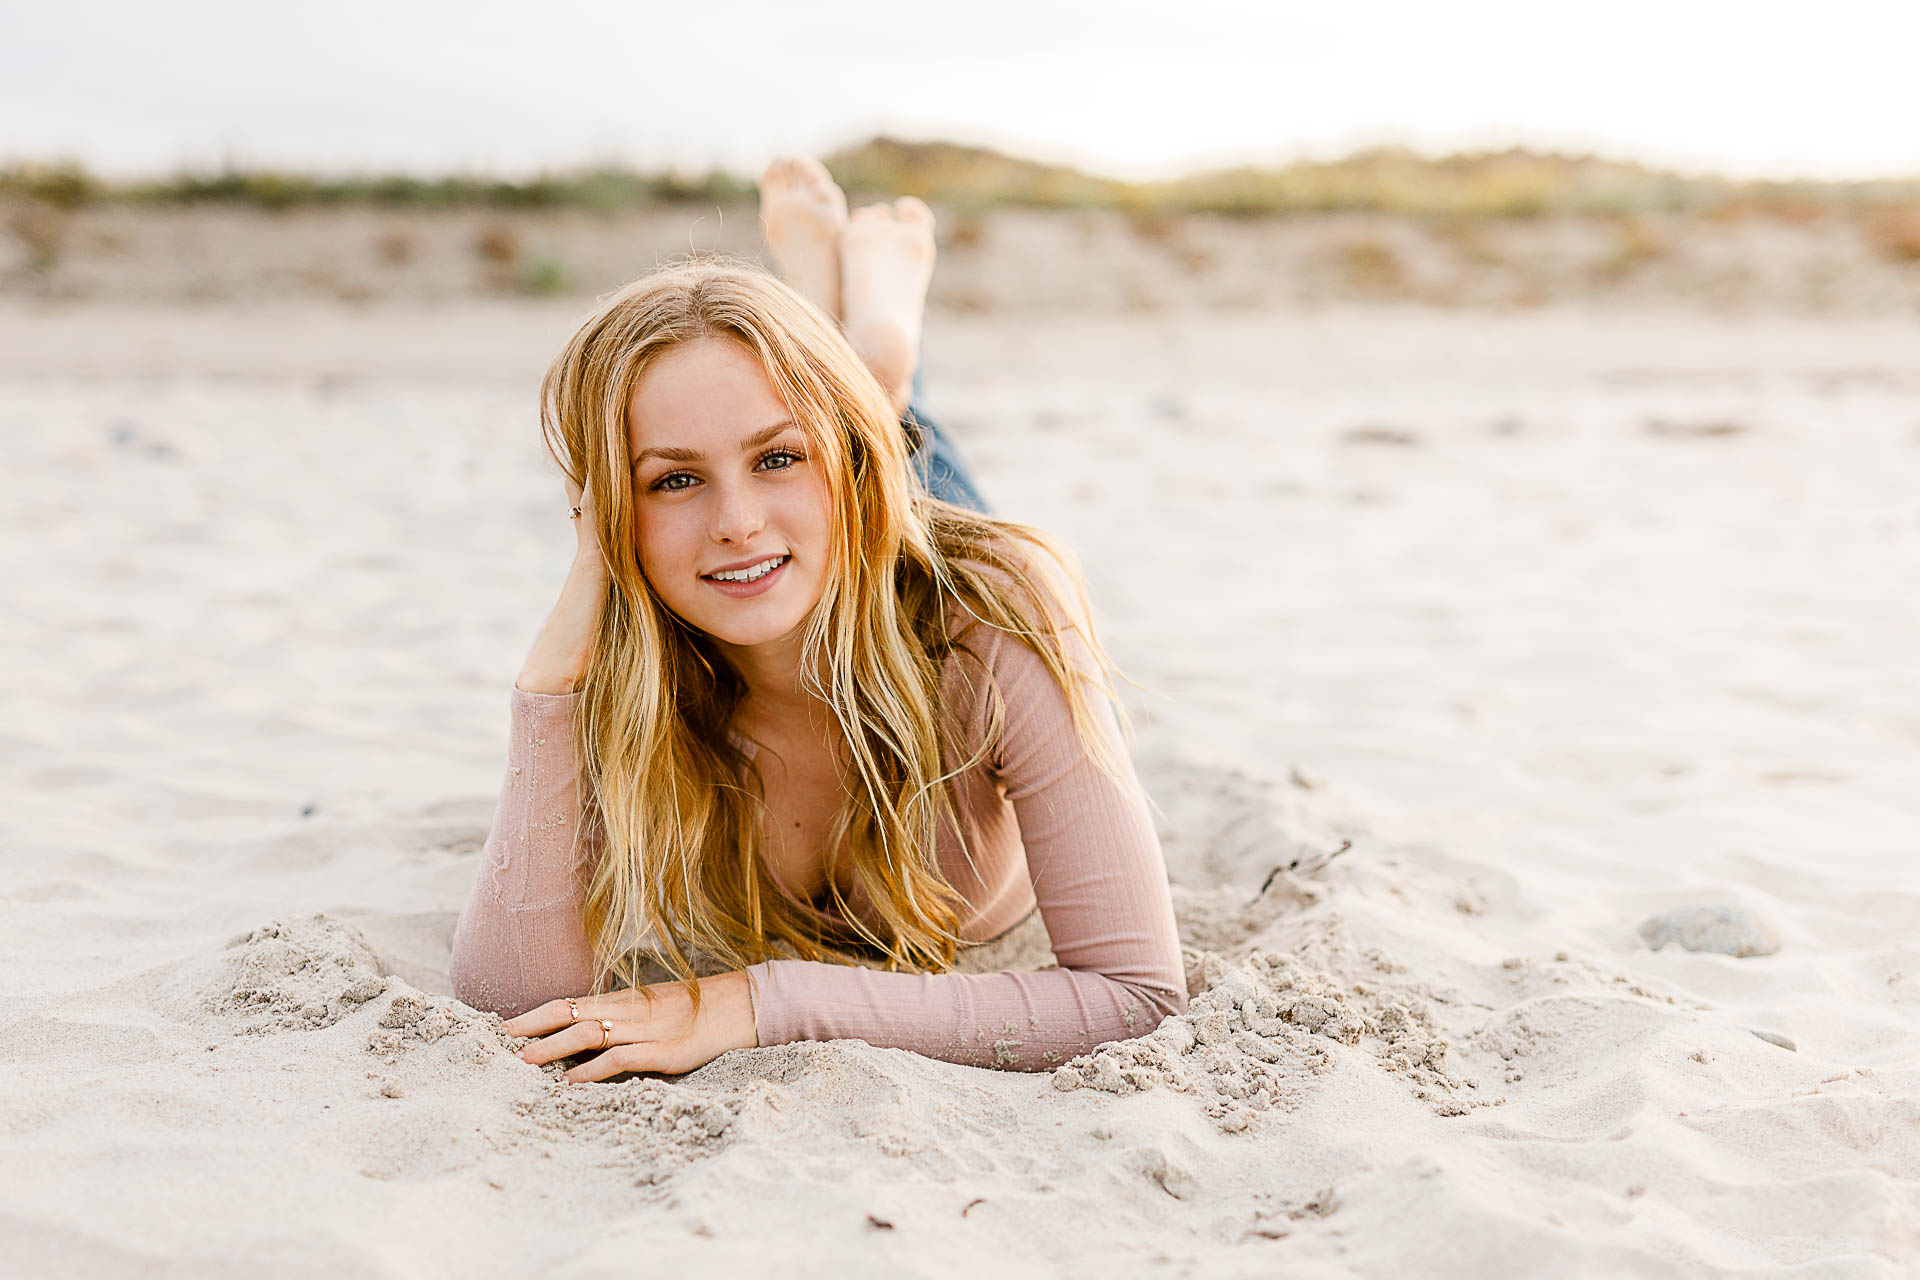 Photo by Scituate Senior Portrait Photographer Christina Runnals | Girl laying in the sand